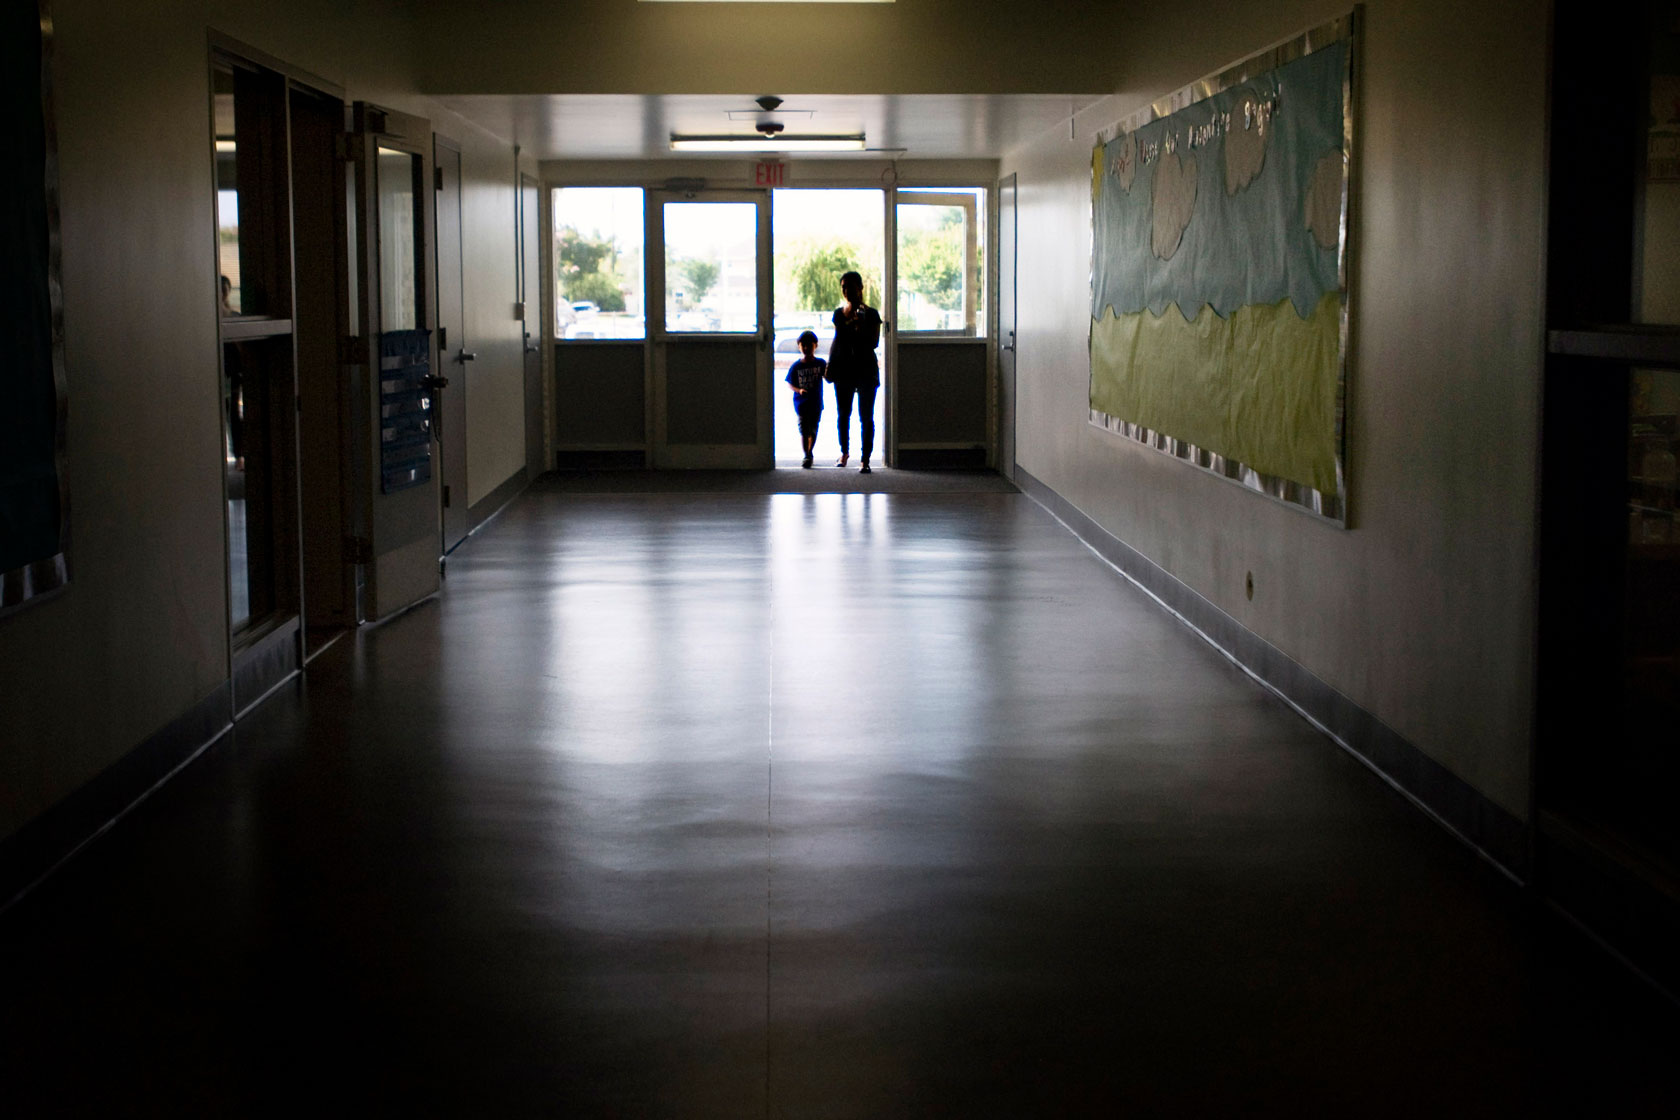 Photo shows a woman and her young son entering a doorway at the end of a dark school hallway.